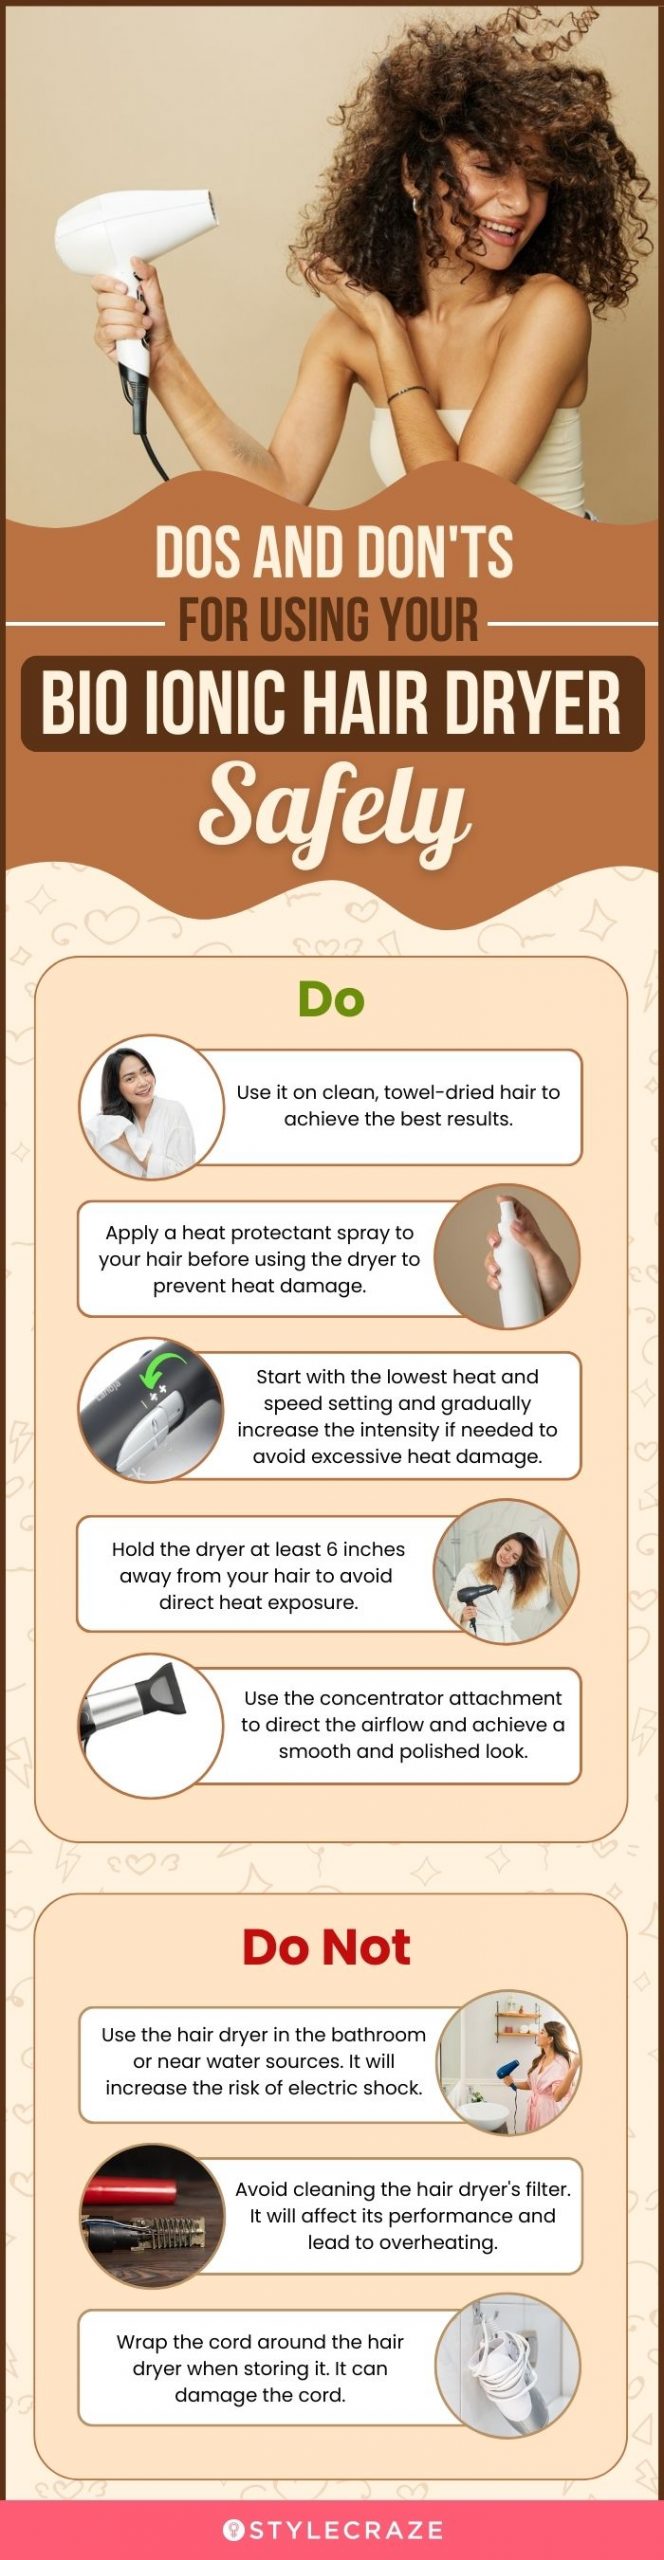 Dos And Don'ts For Using Your Bio Ionic Hair Dryer Safely (infographic)